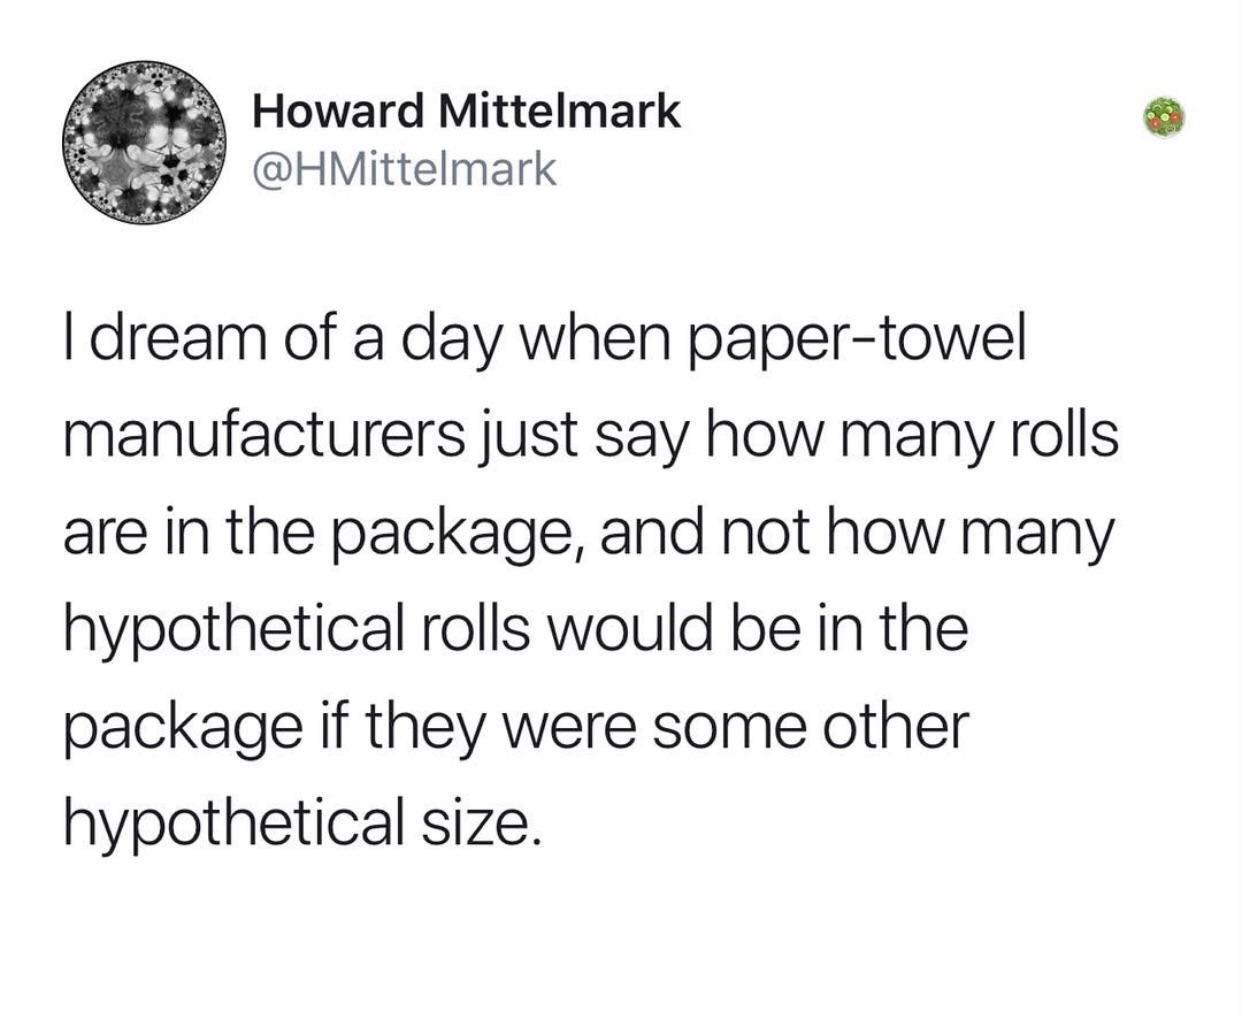 I dream of a day when papertowel manufacturers just say how many rolls are in the package, and not how many hypothetical rolls would be in the package if they were some other hypothetical size.